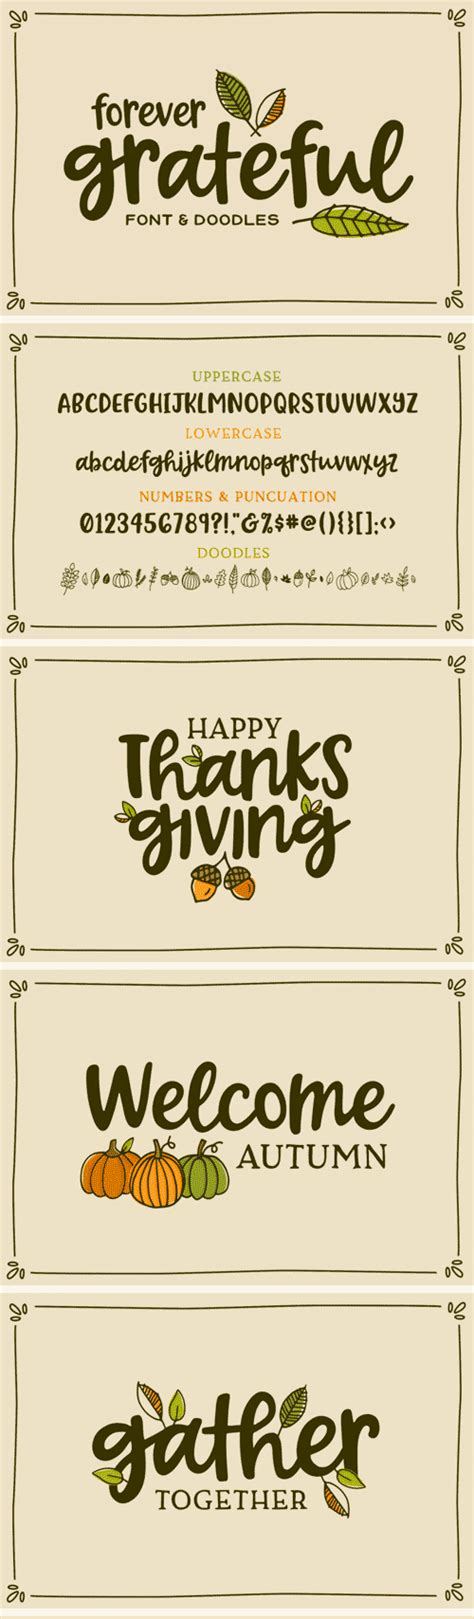 Thehungryjpeg Forever Grateful Font And Doodles 3493639 Avaxhome